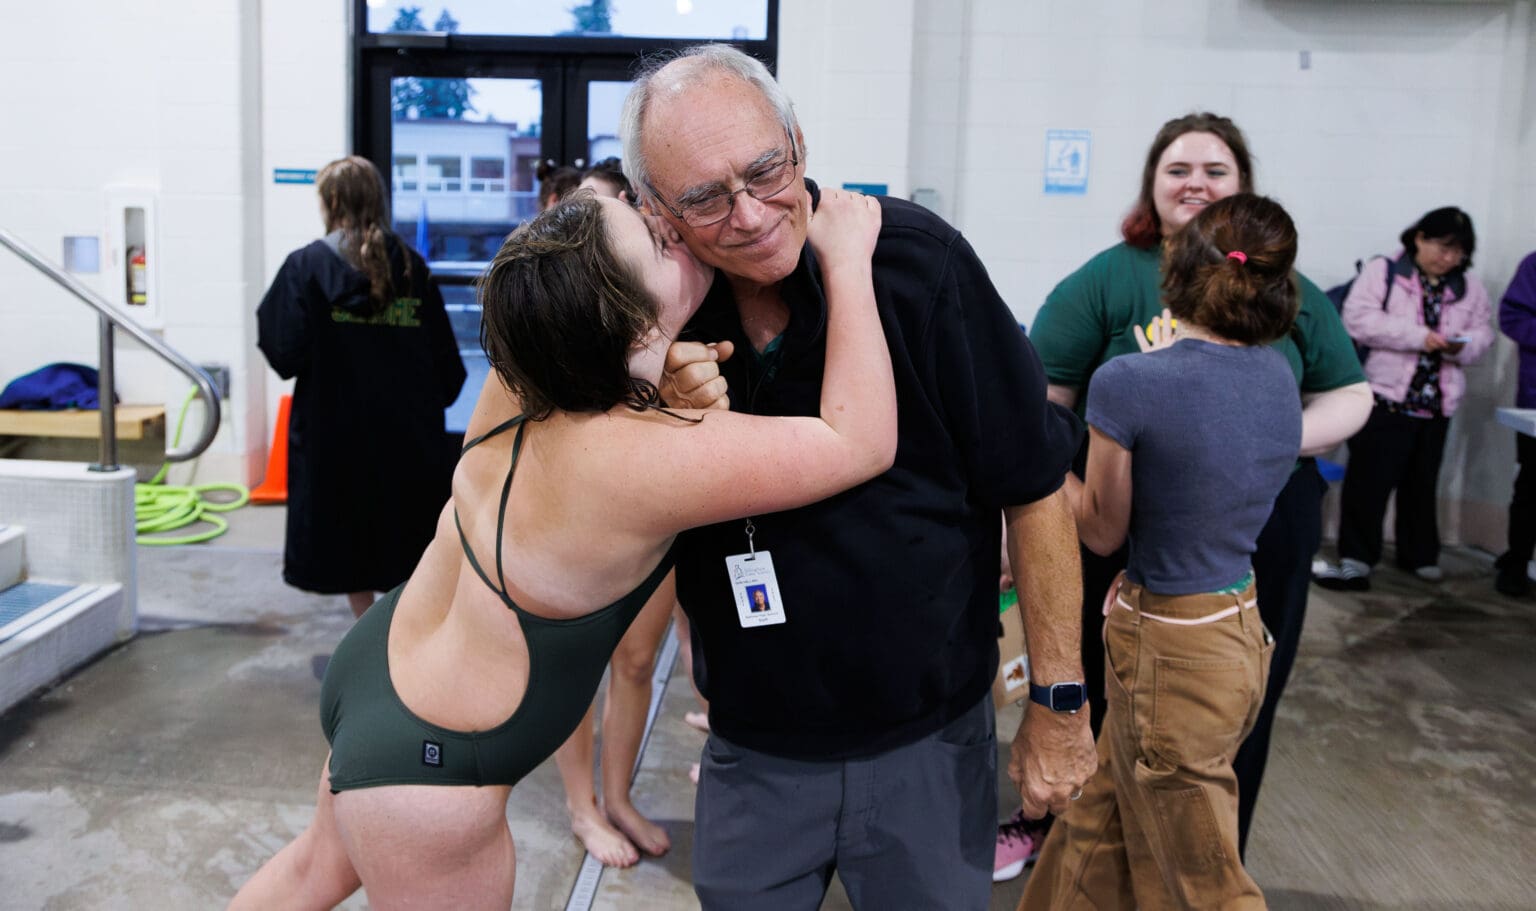 Lauren Gongwer pulls her father, Sehome swim coach Don Helling, for a kiss on the cheek.